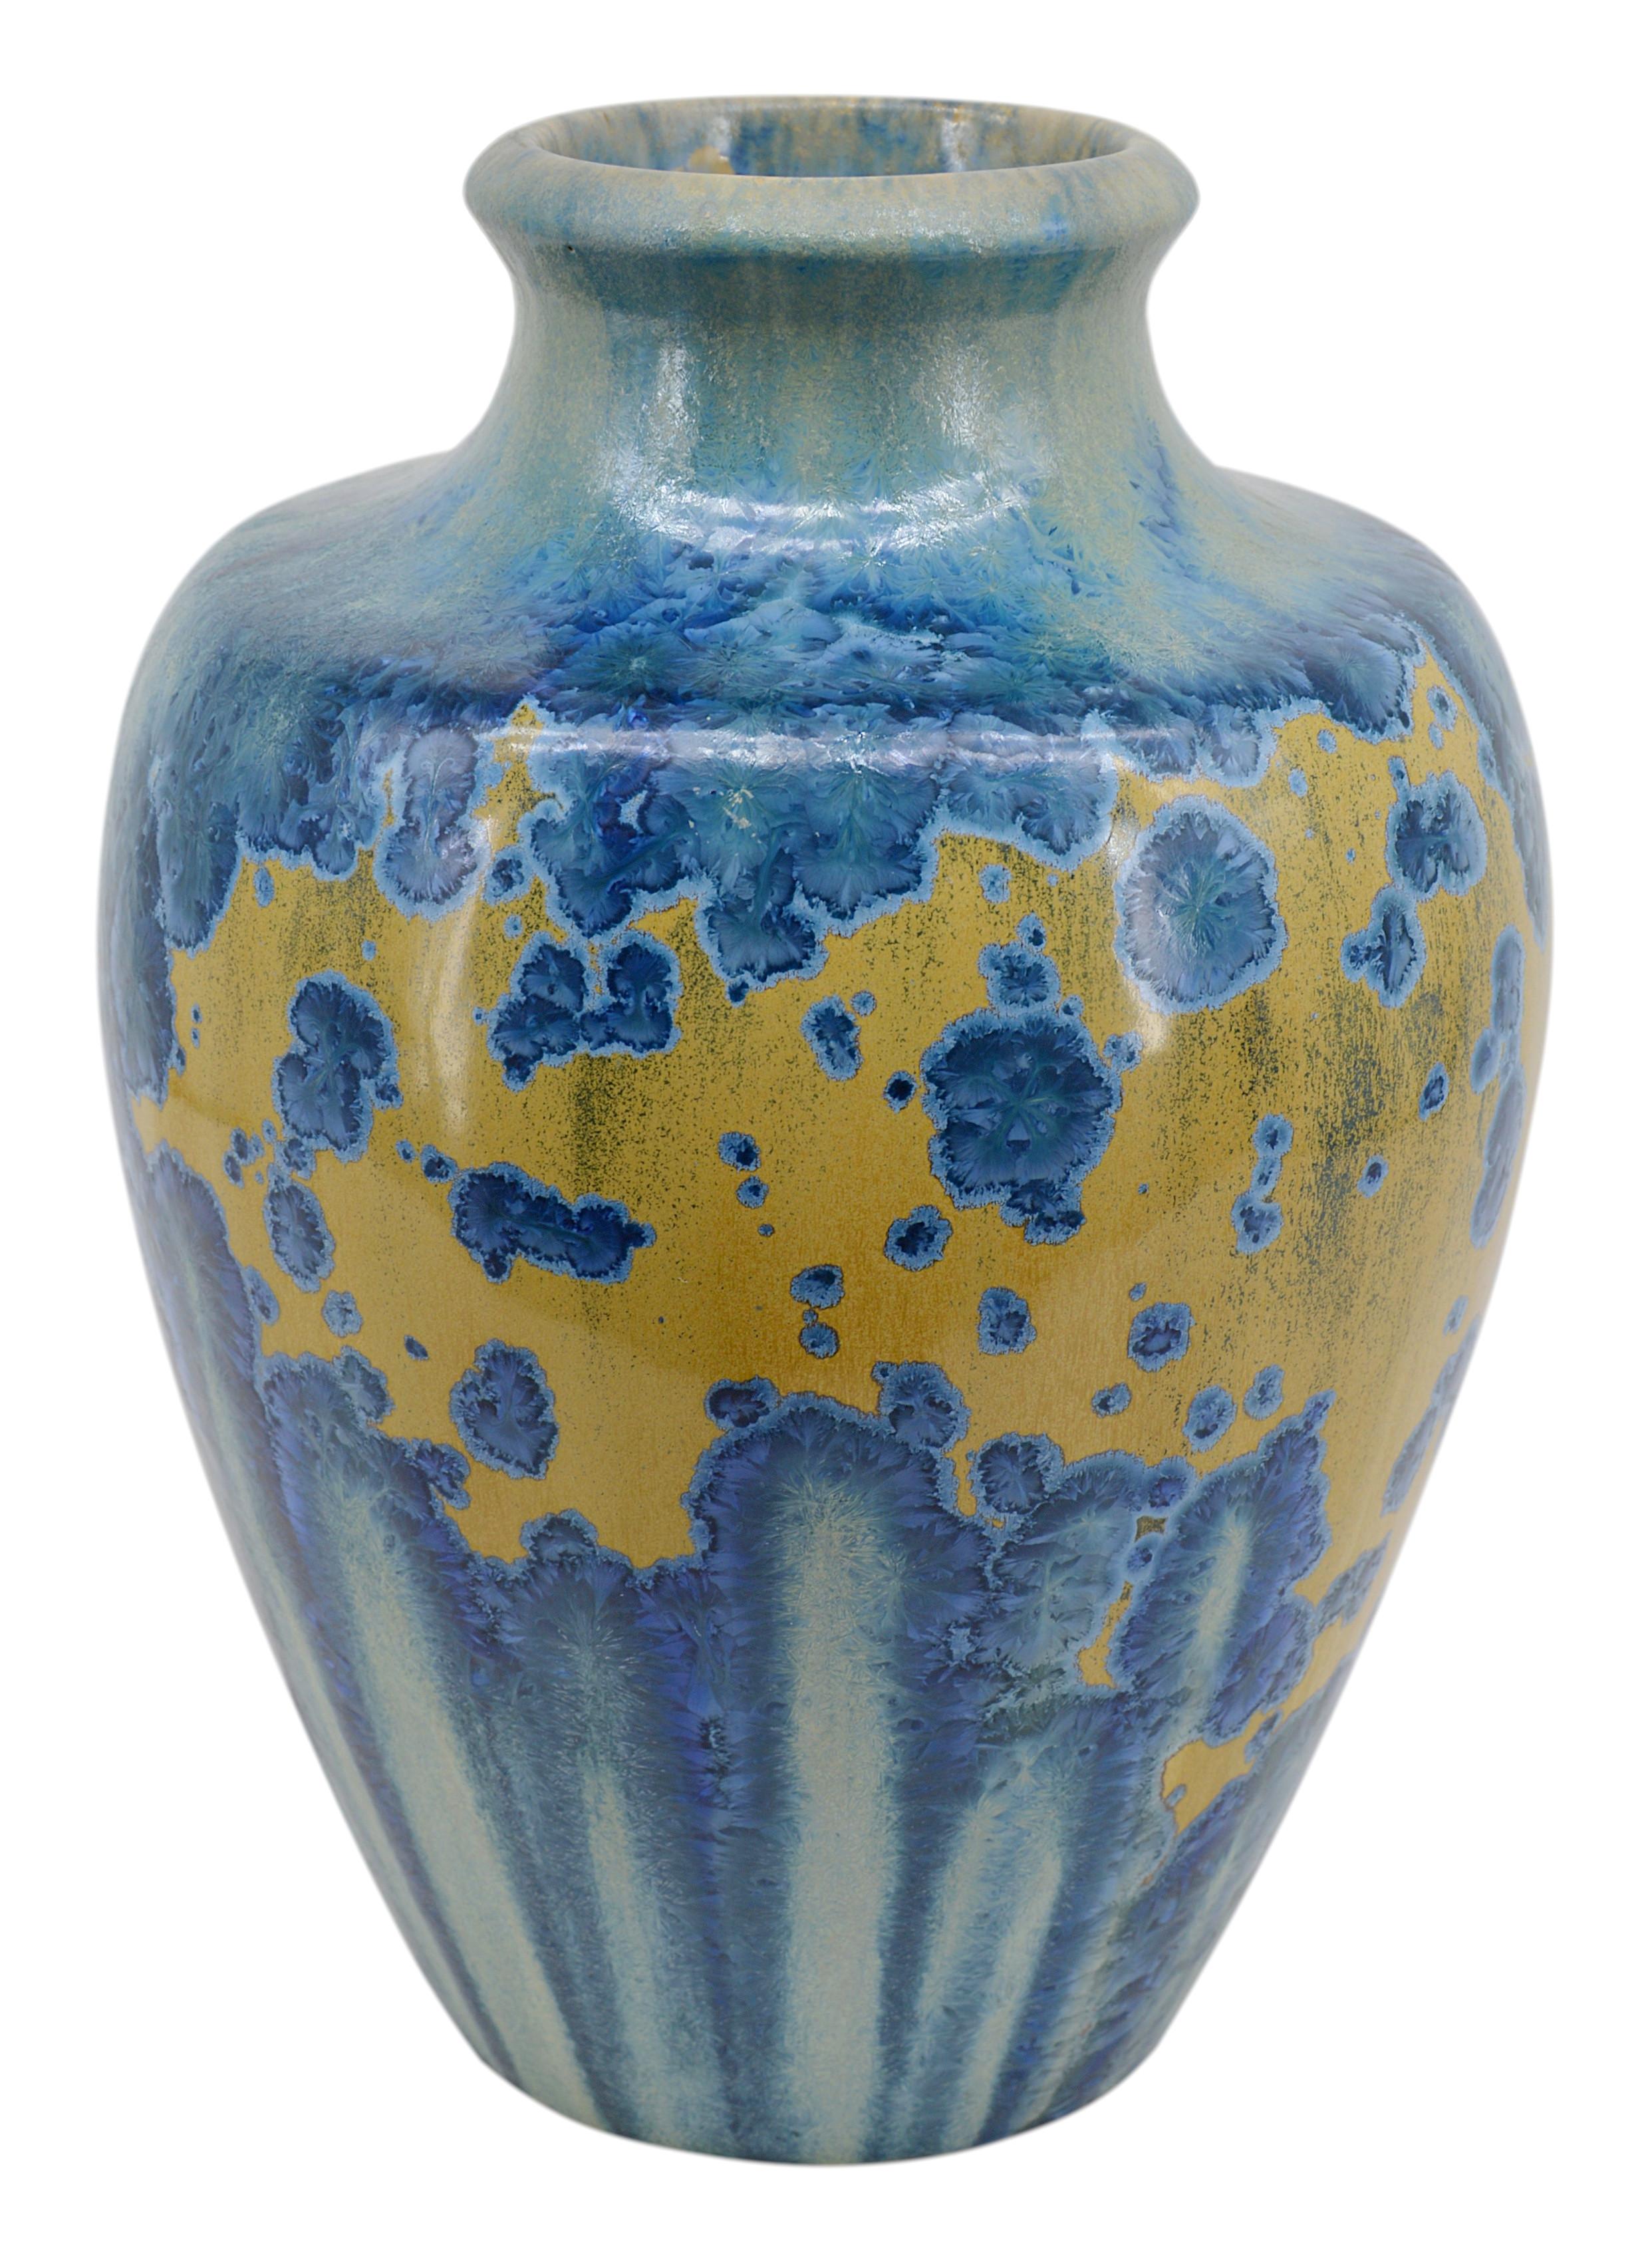 Exceptional French Art Deco stoneware vase by Pierrefonds, France, 1920s. 1st choice crystallized stoneware. The crystallization technique was very difficult to achieve. The failures were numerous. Some pieces were reclassified as semi-crystallized